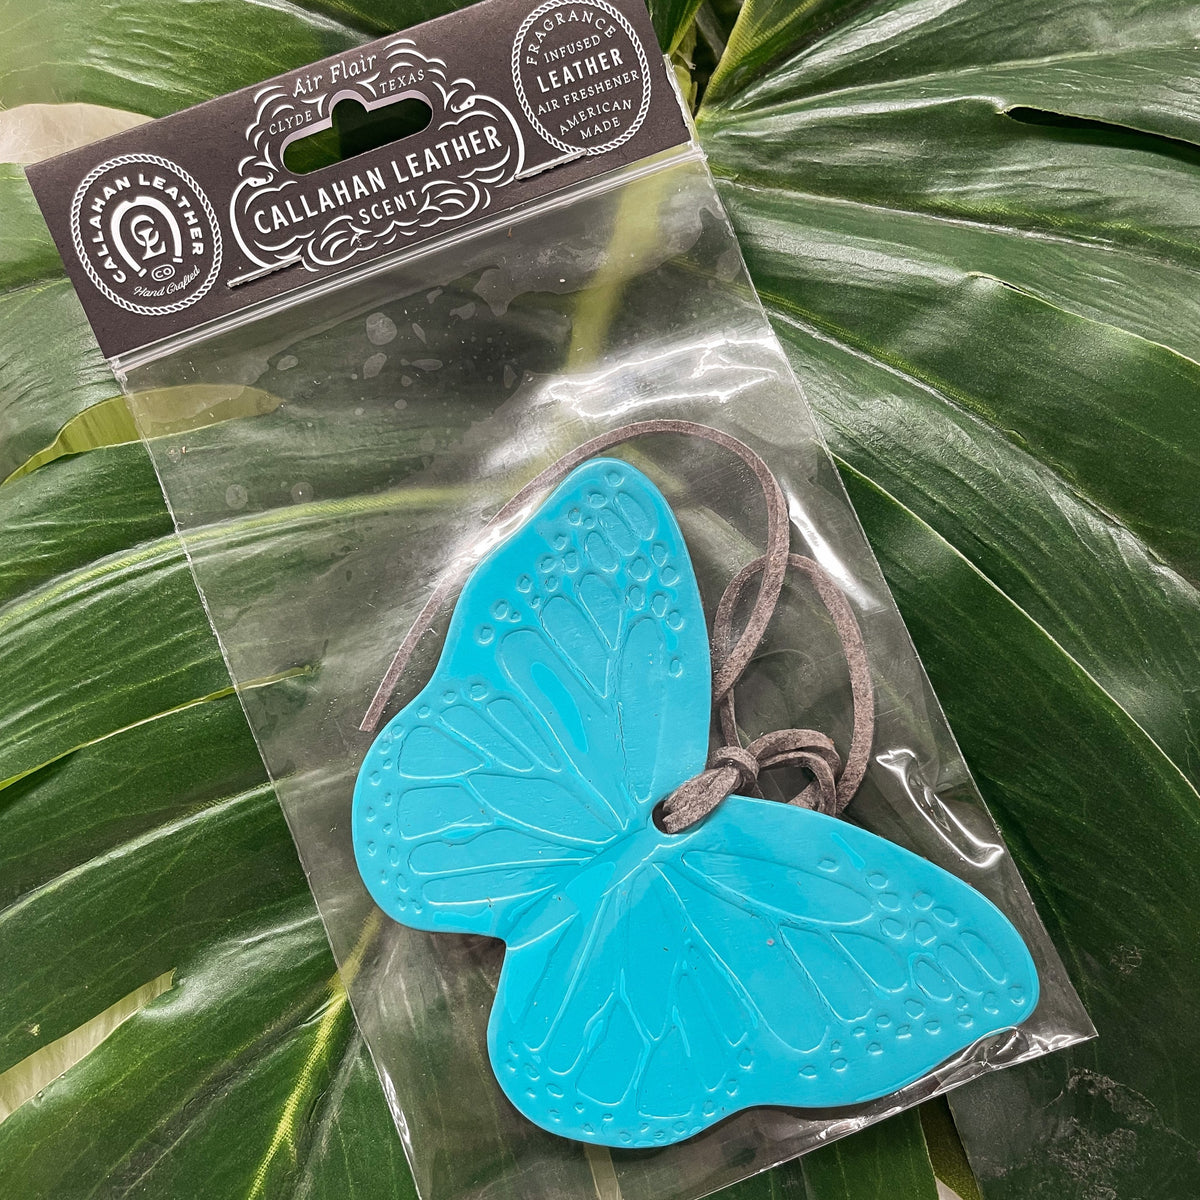 Butterfly Leather Freshie – Prickly Pear TX